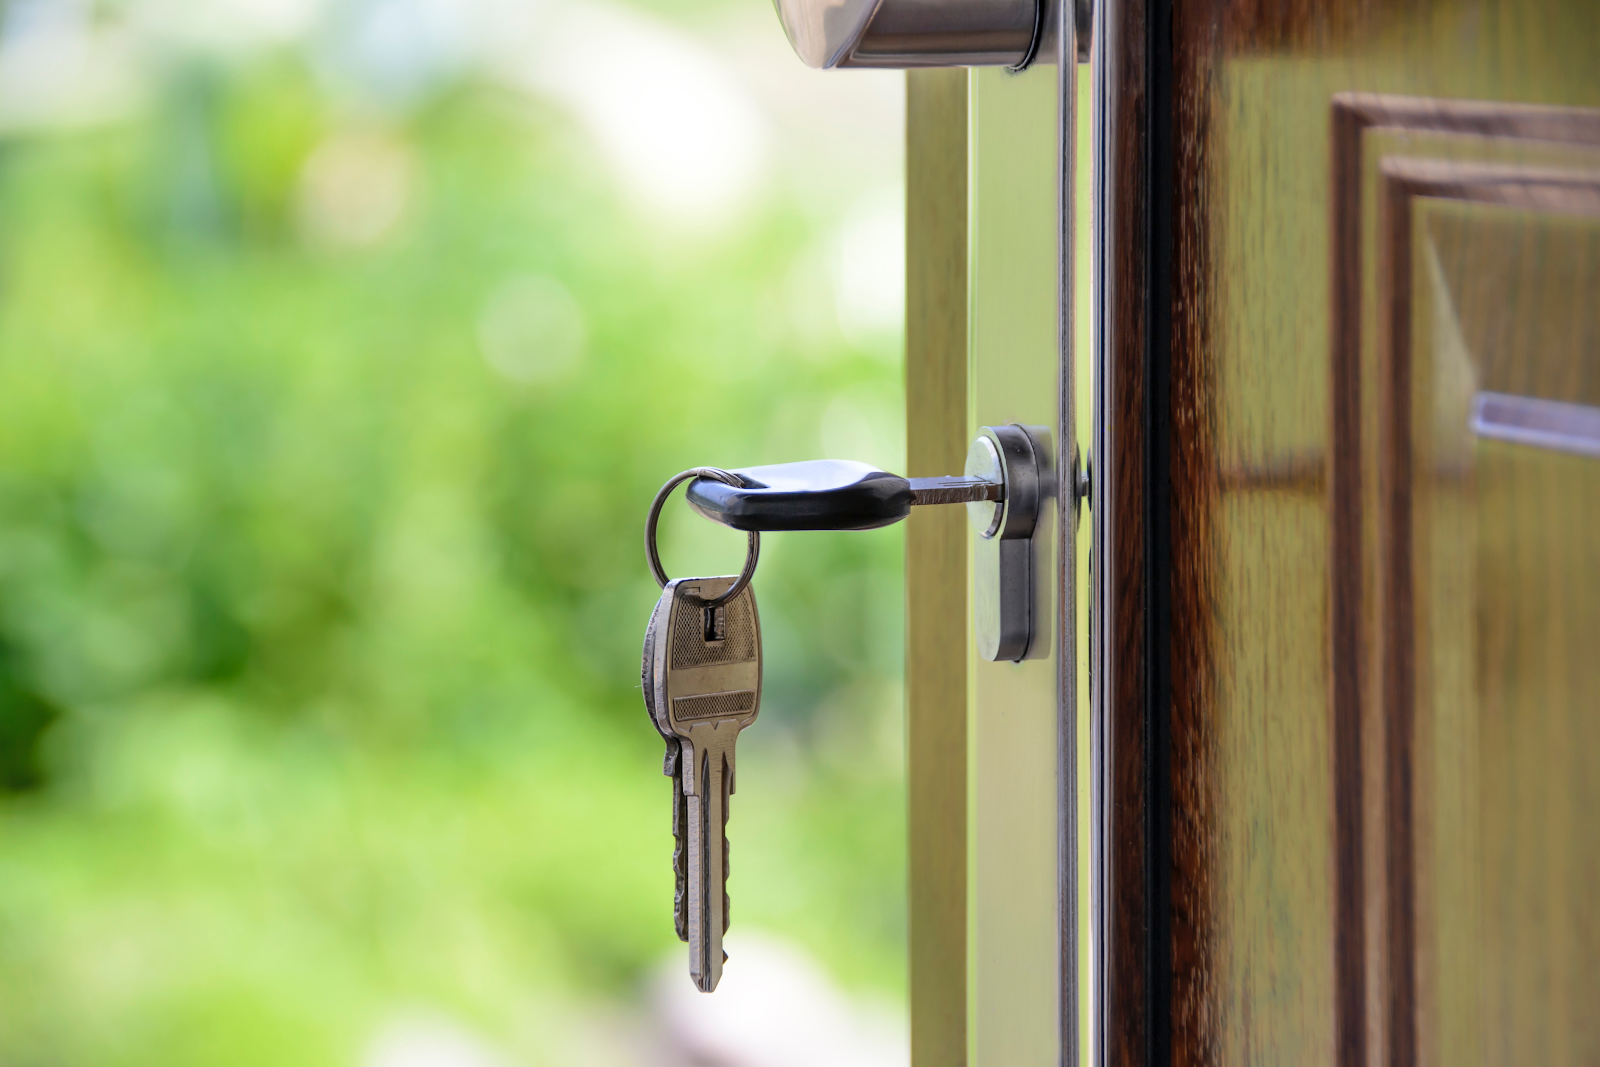 Keep your house safe with these home security tips